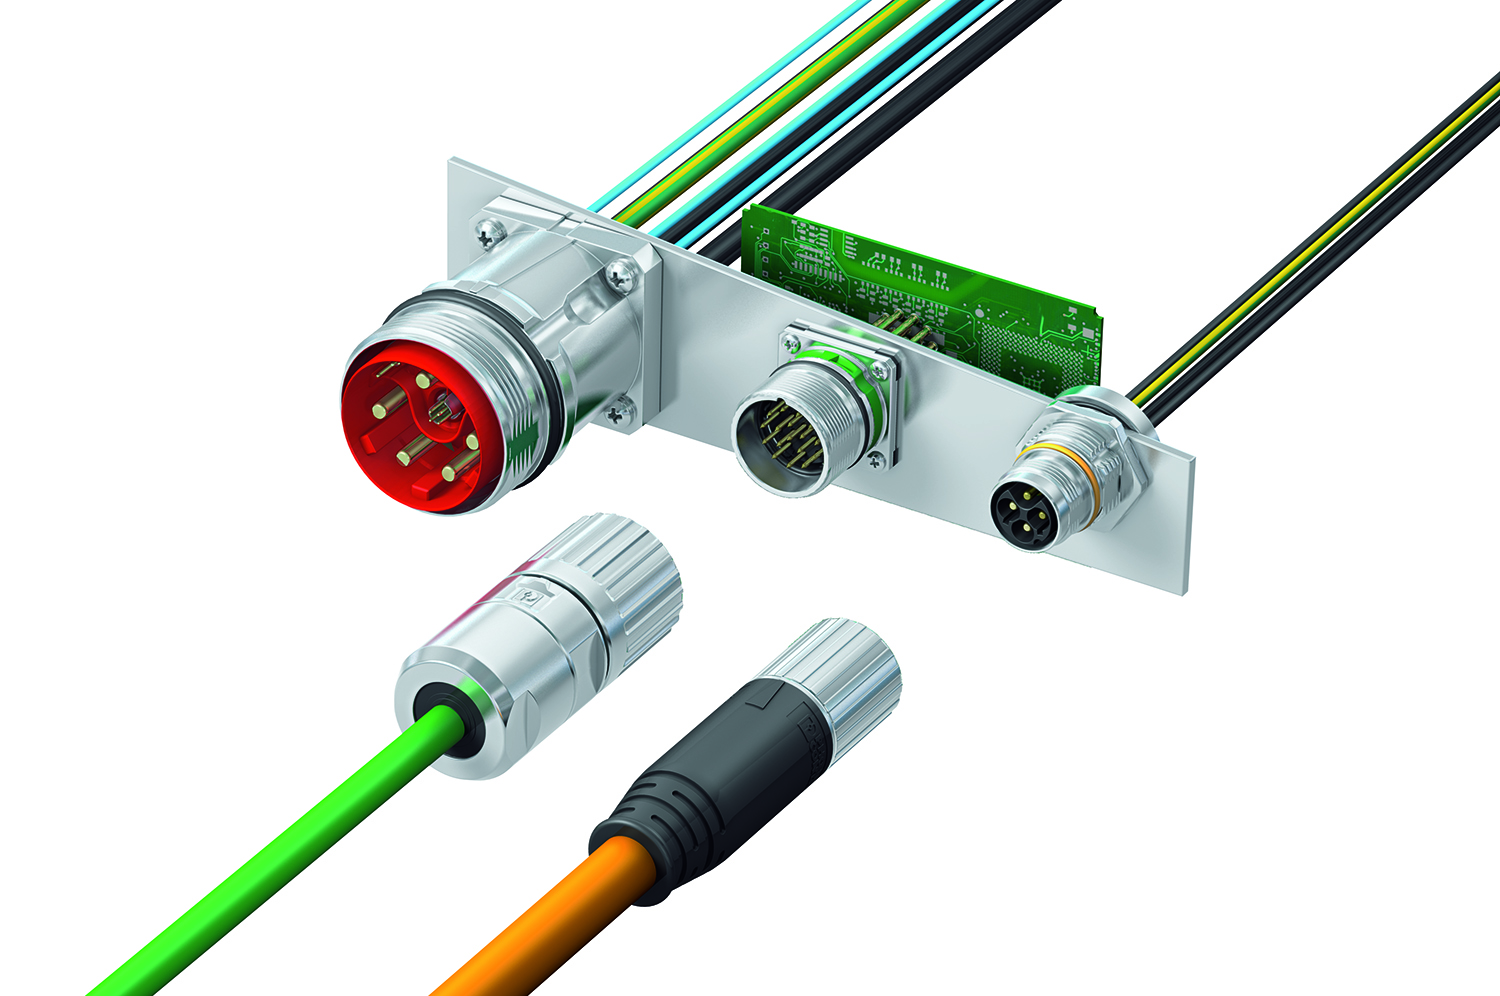 high-temperature connector products from Phoenix Contact